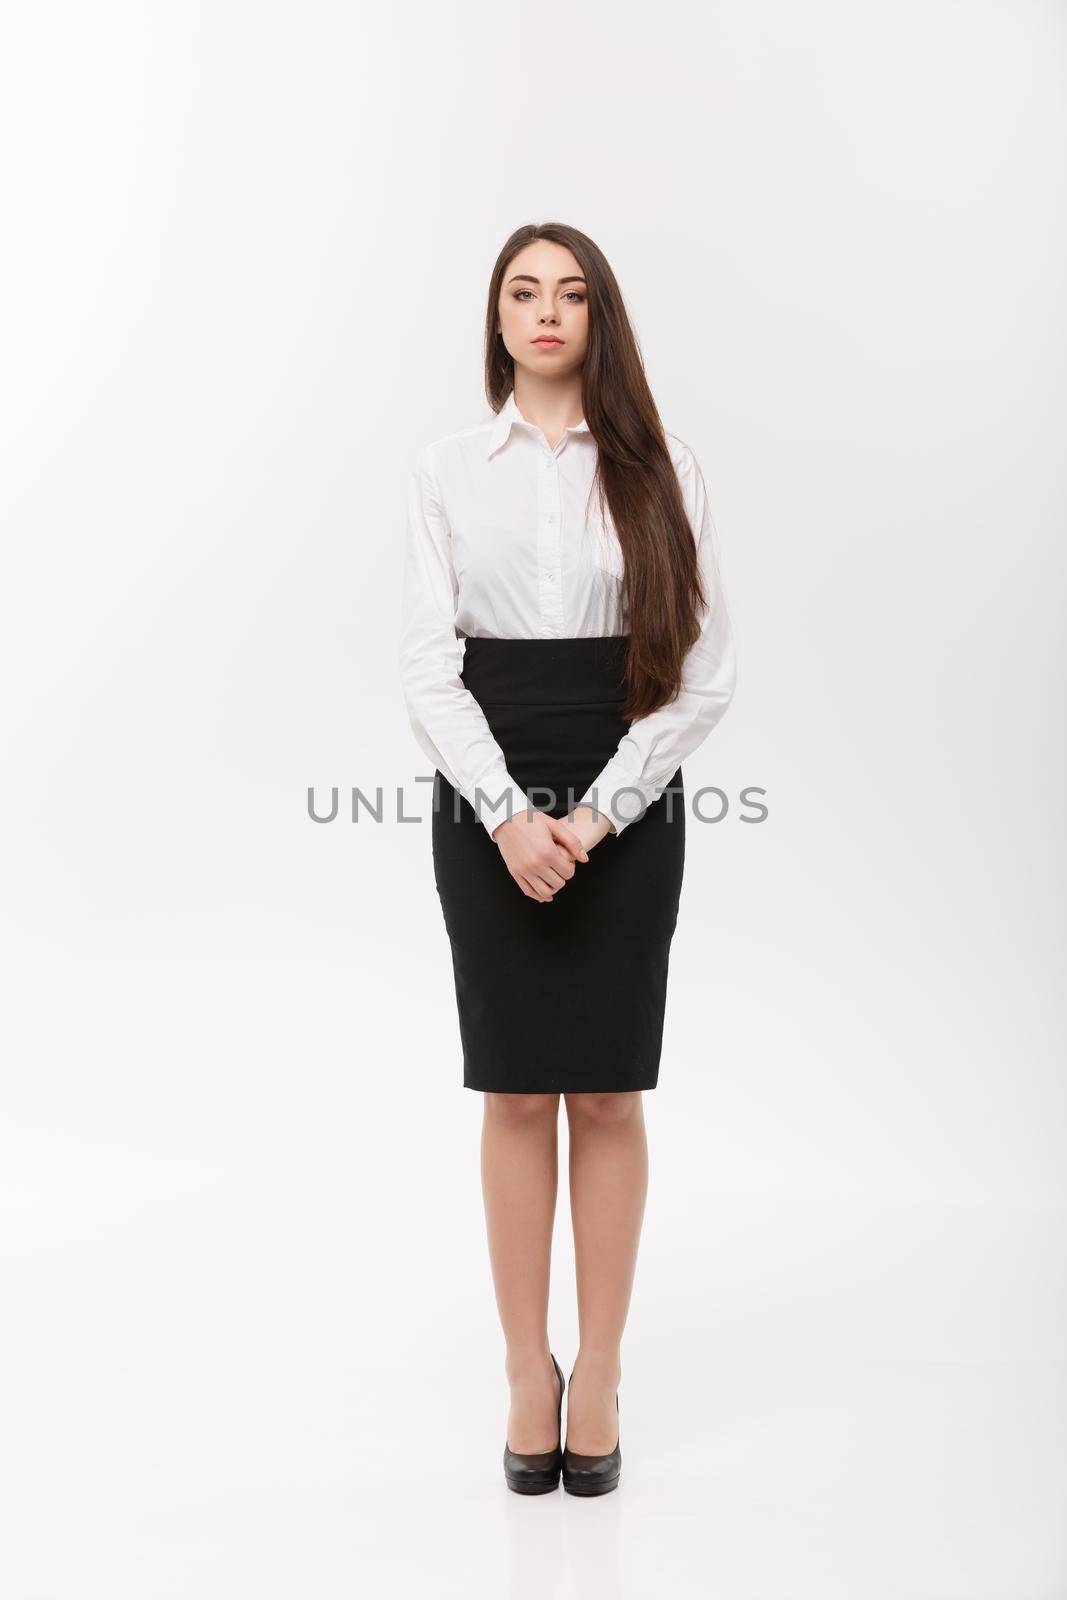 Business Concept - Modern caucasian business woman in the white studio background with copy space.